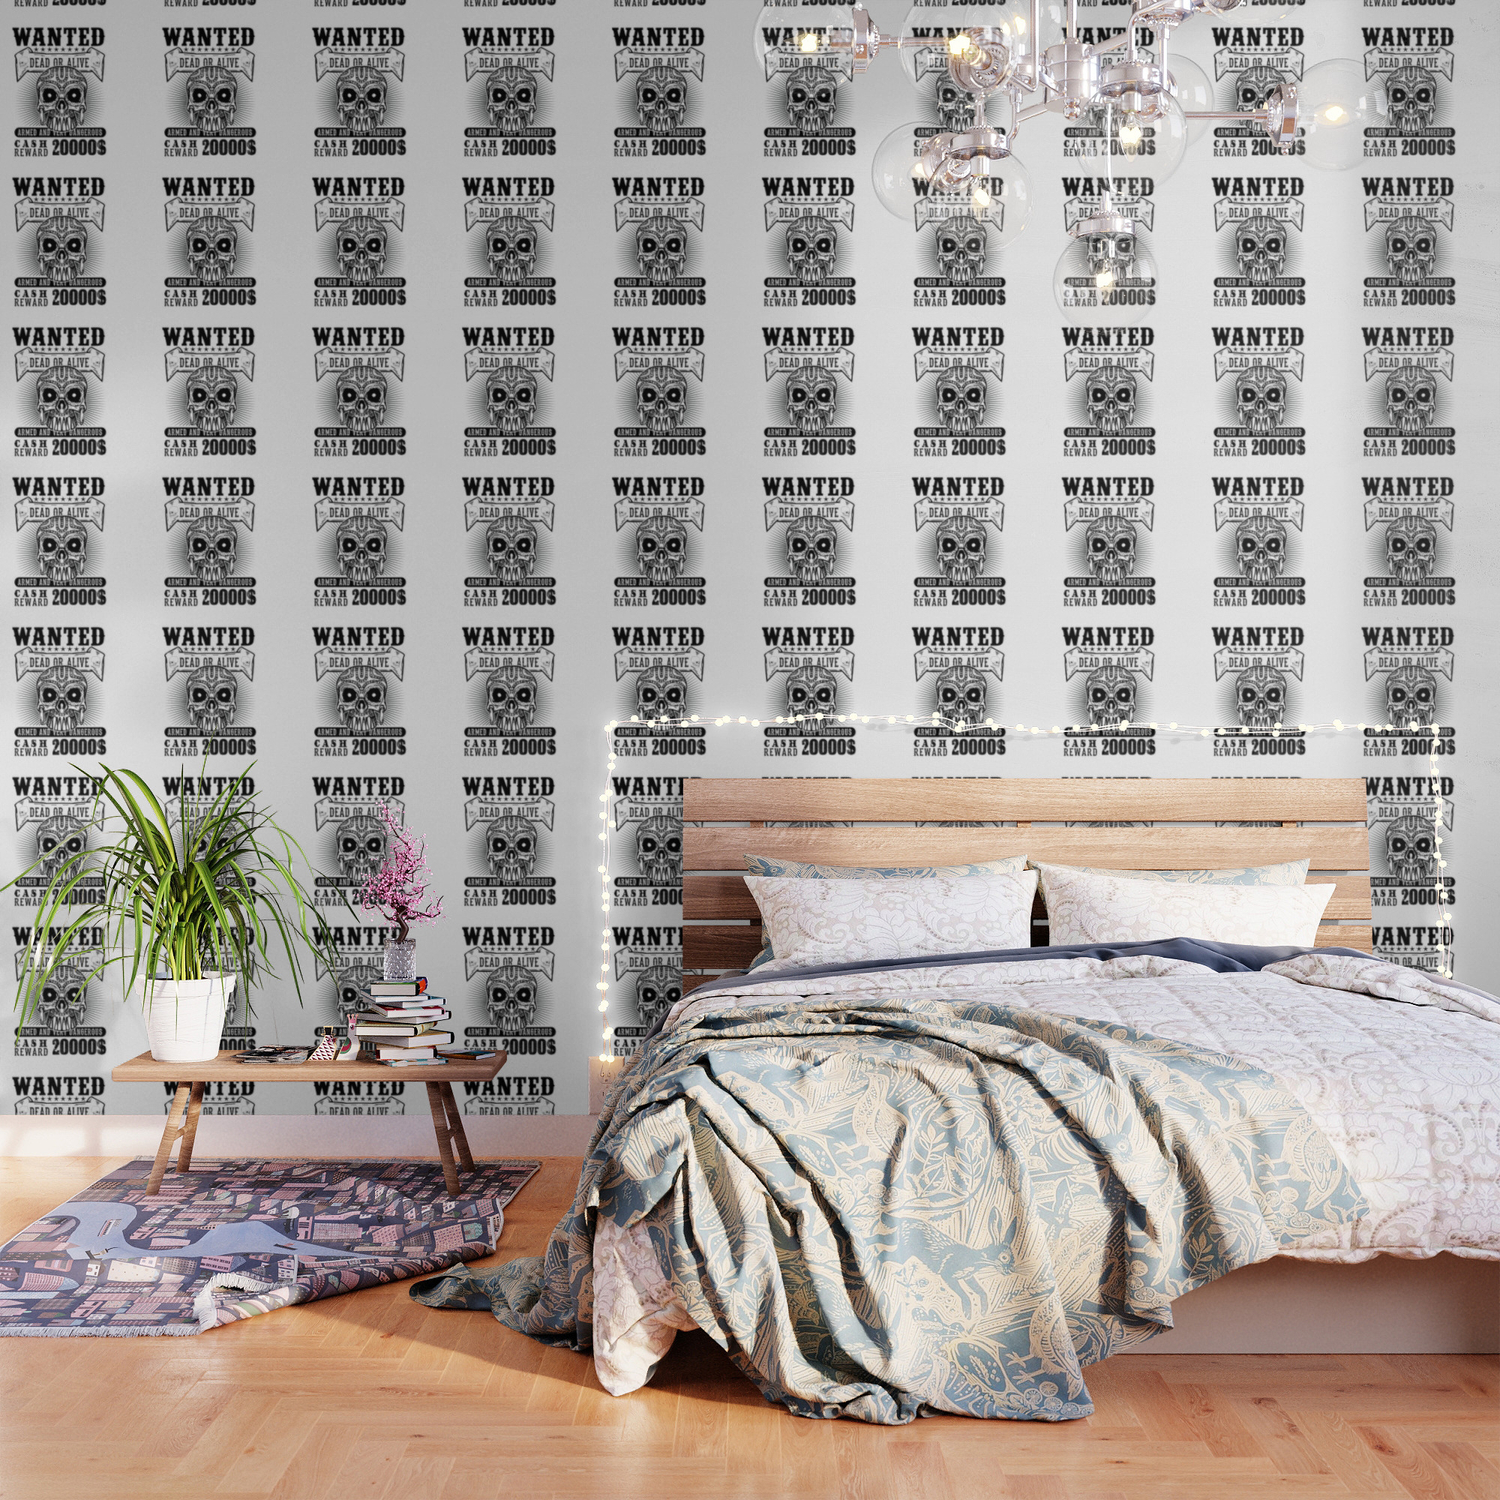 WANTED DEAD OR ALIVE Wallpaper by FreshMerchDesigns | Society6